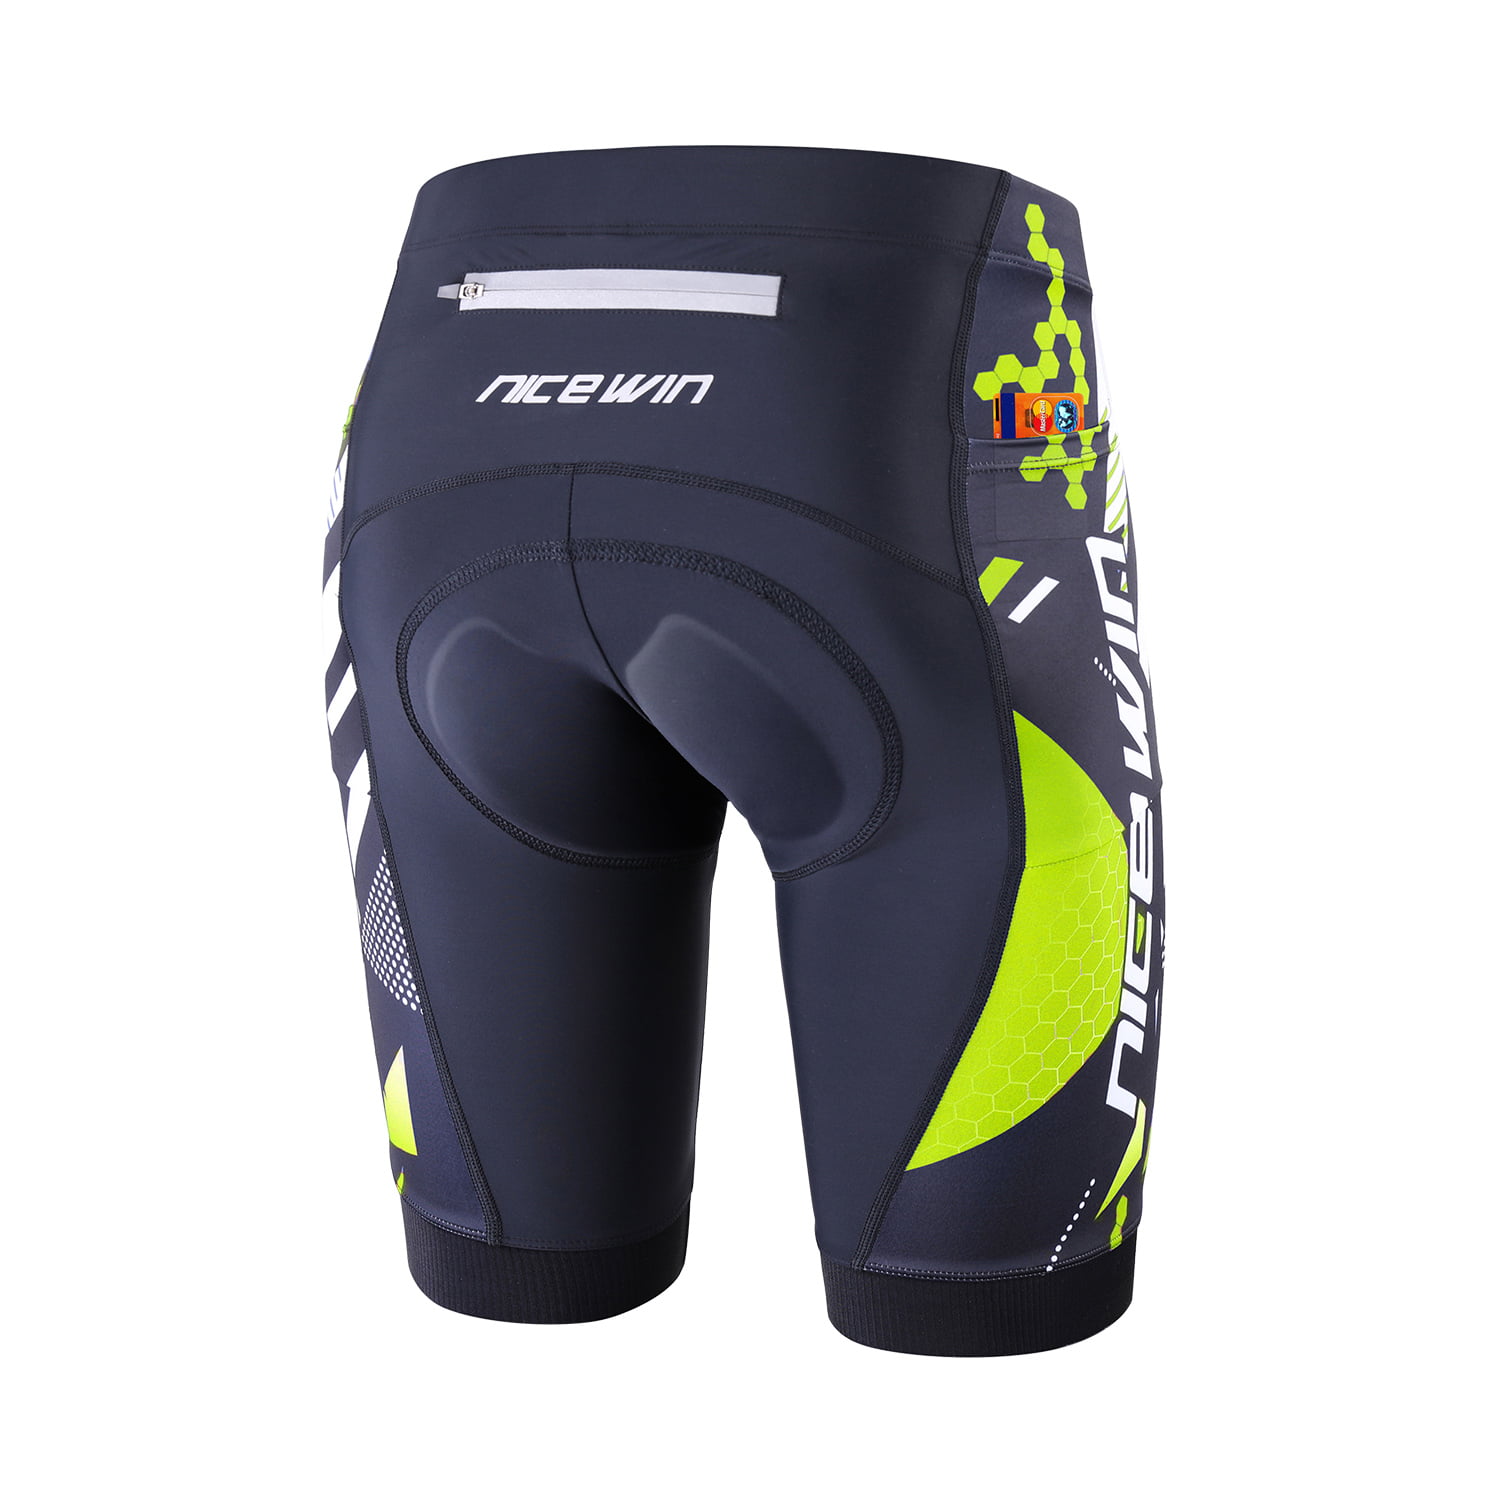 Men’s Cycling Shorts Compression Bike Riding Tights 3D Padded Quick-Dry Half Pants 